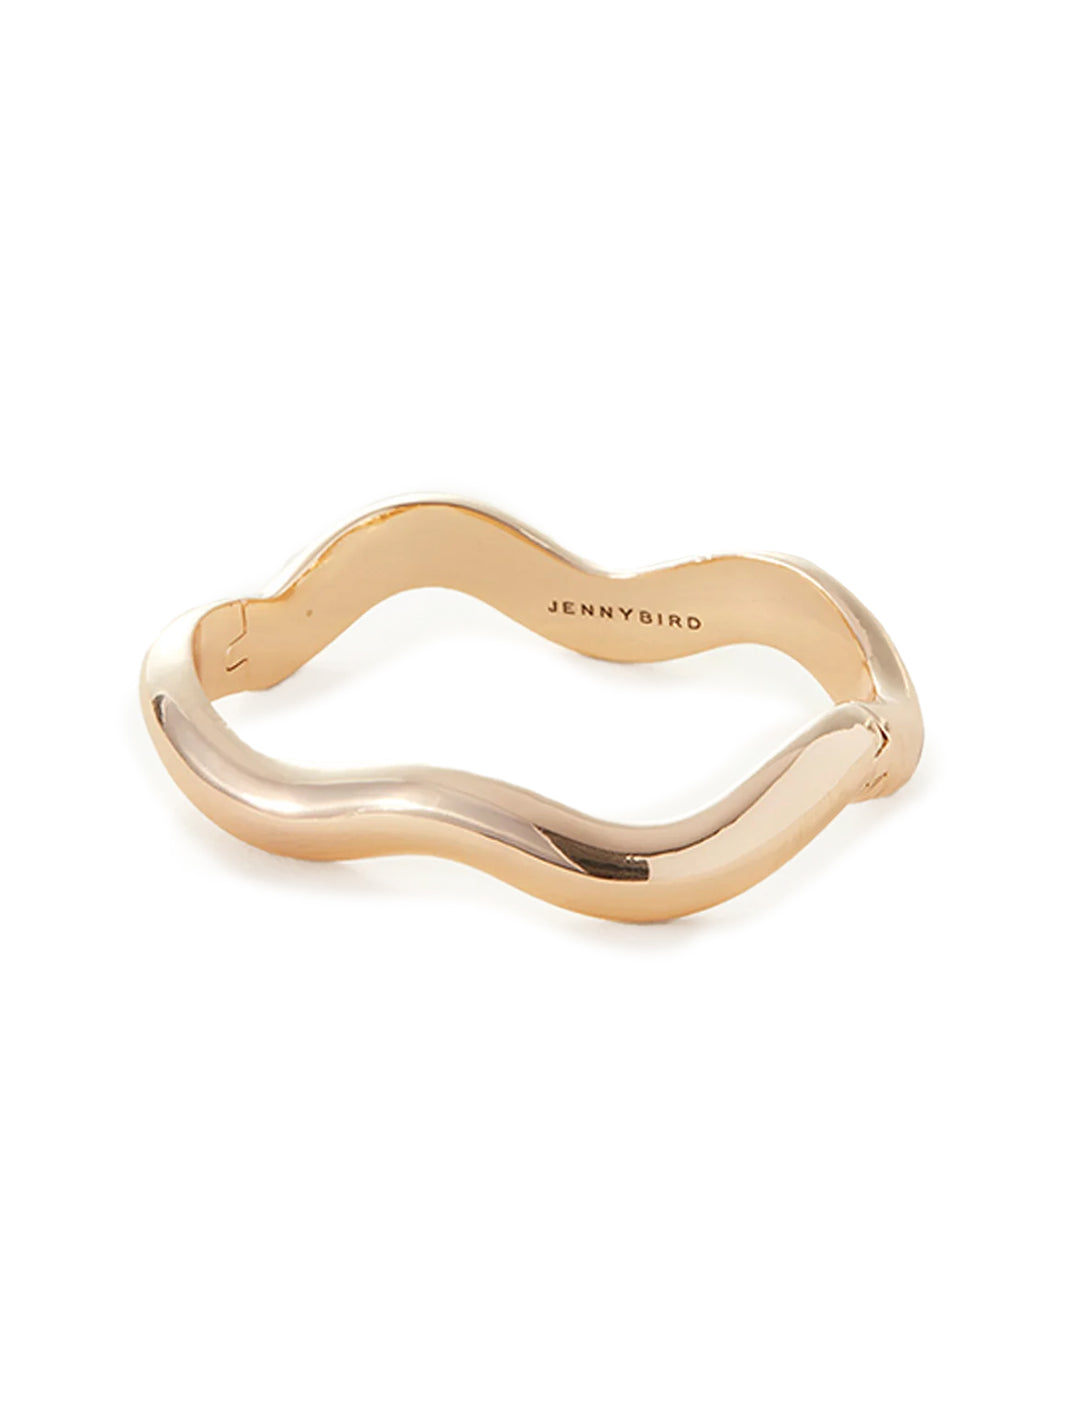 Front view of Jenny Bird's ola bangle in gold.